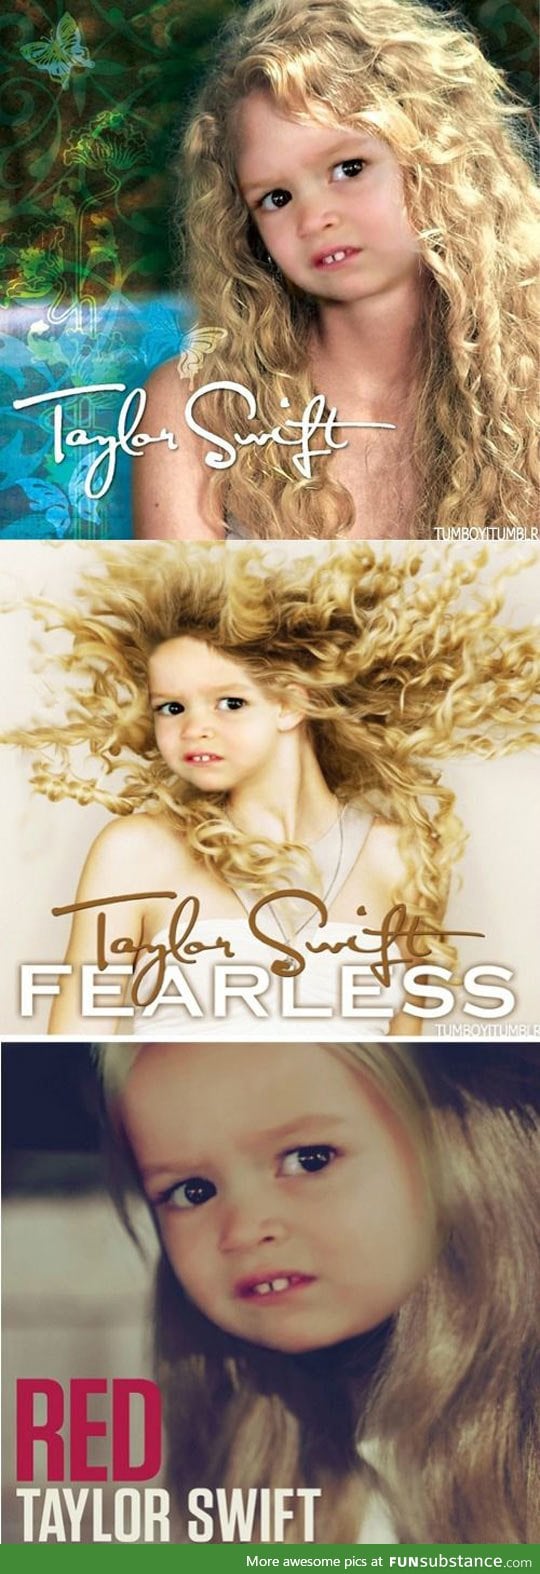 The new covers for Taylor Swift albums